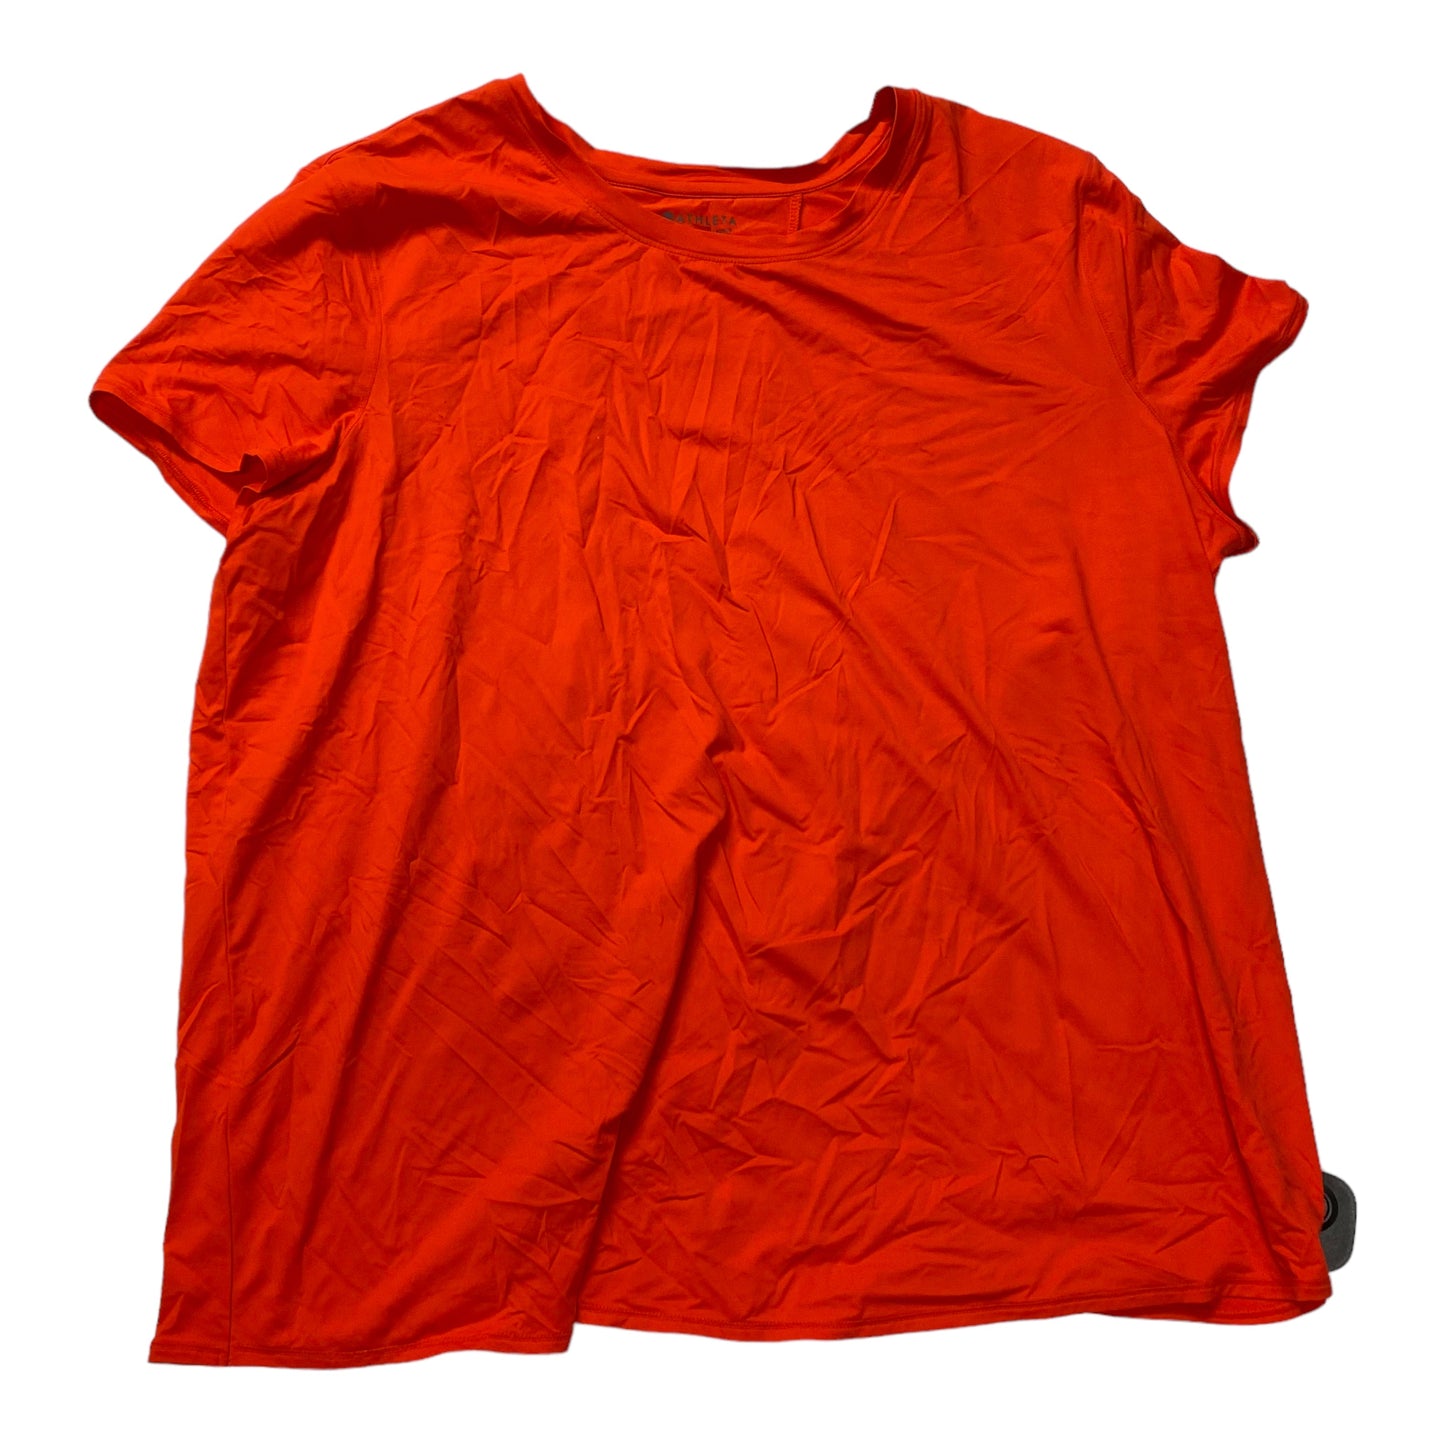 Red Athletic Top Short Sleeve Athleta, Size 1x